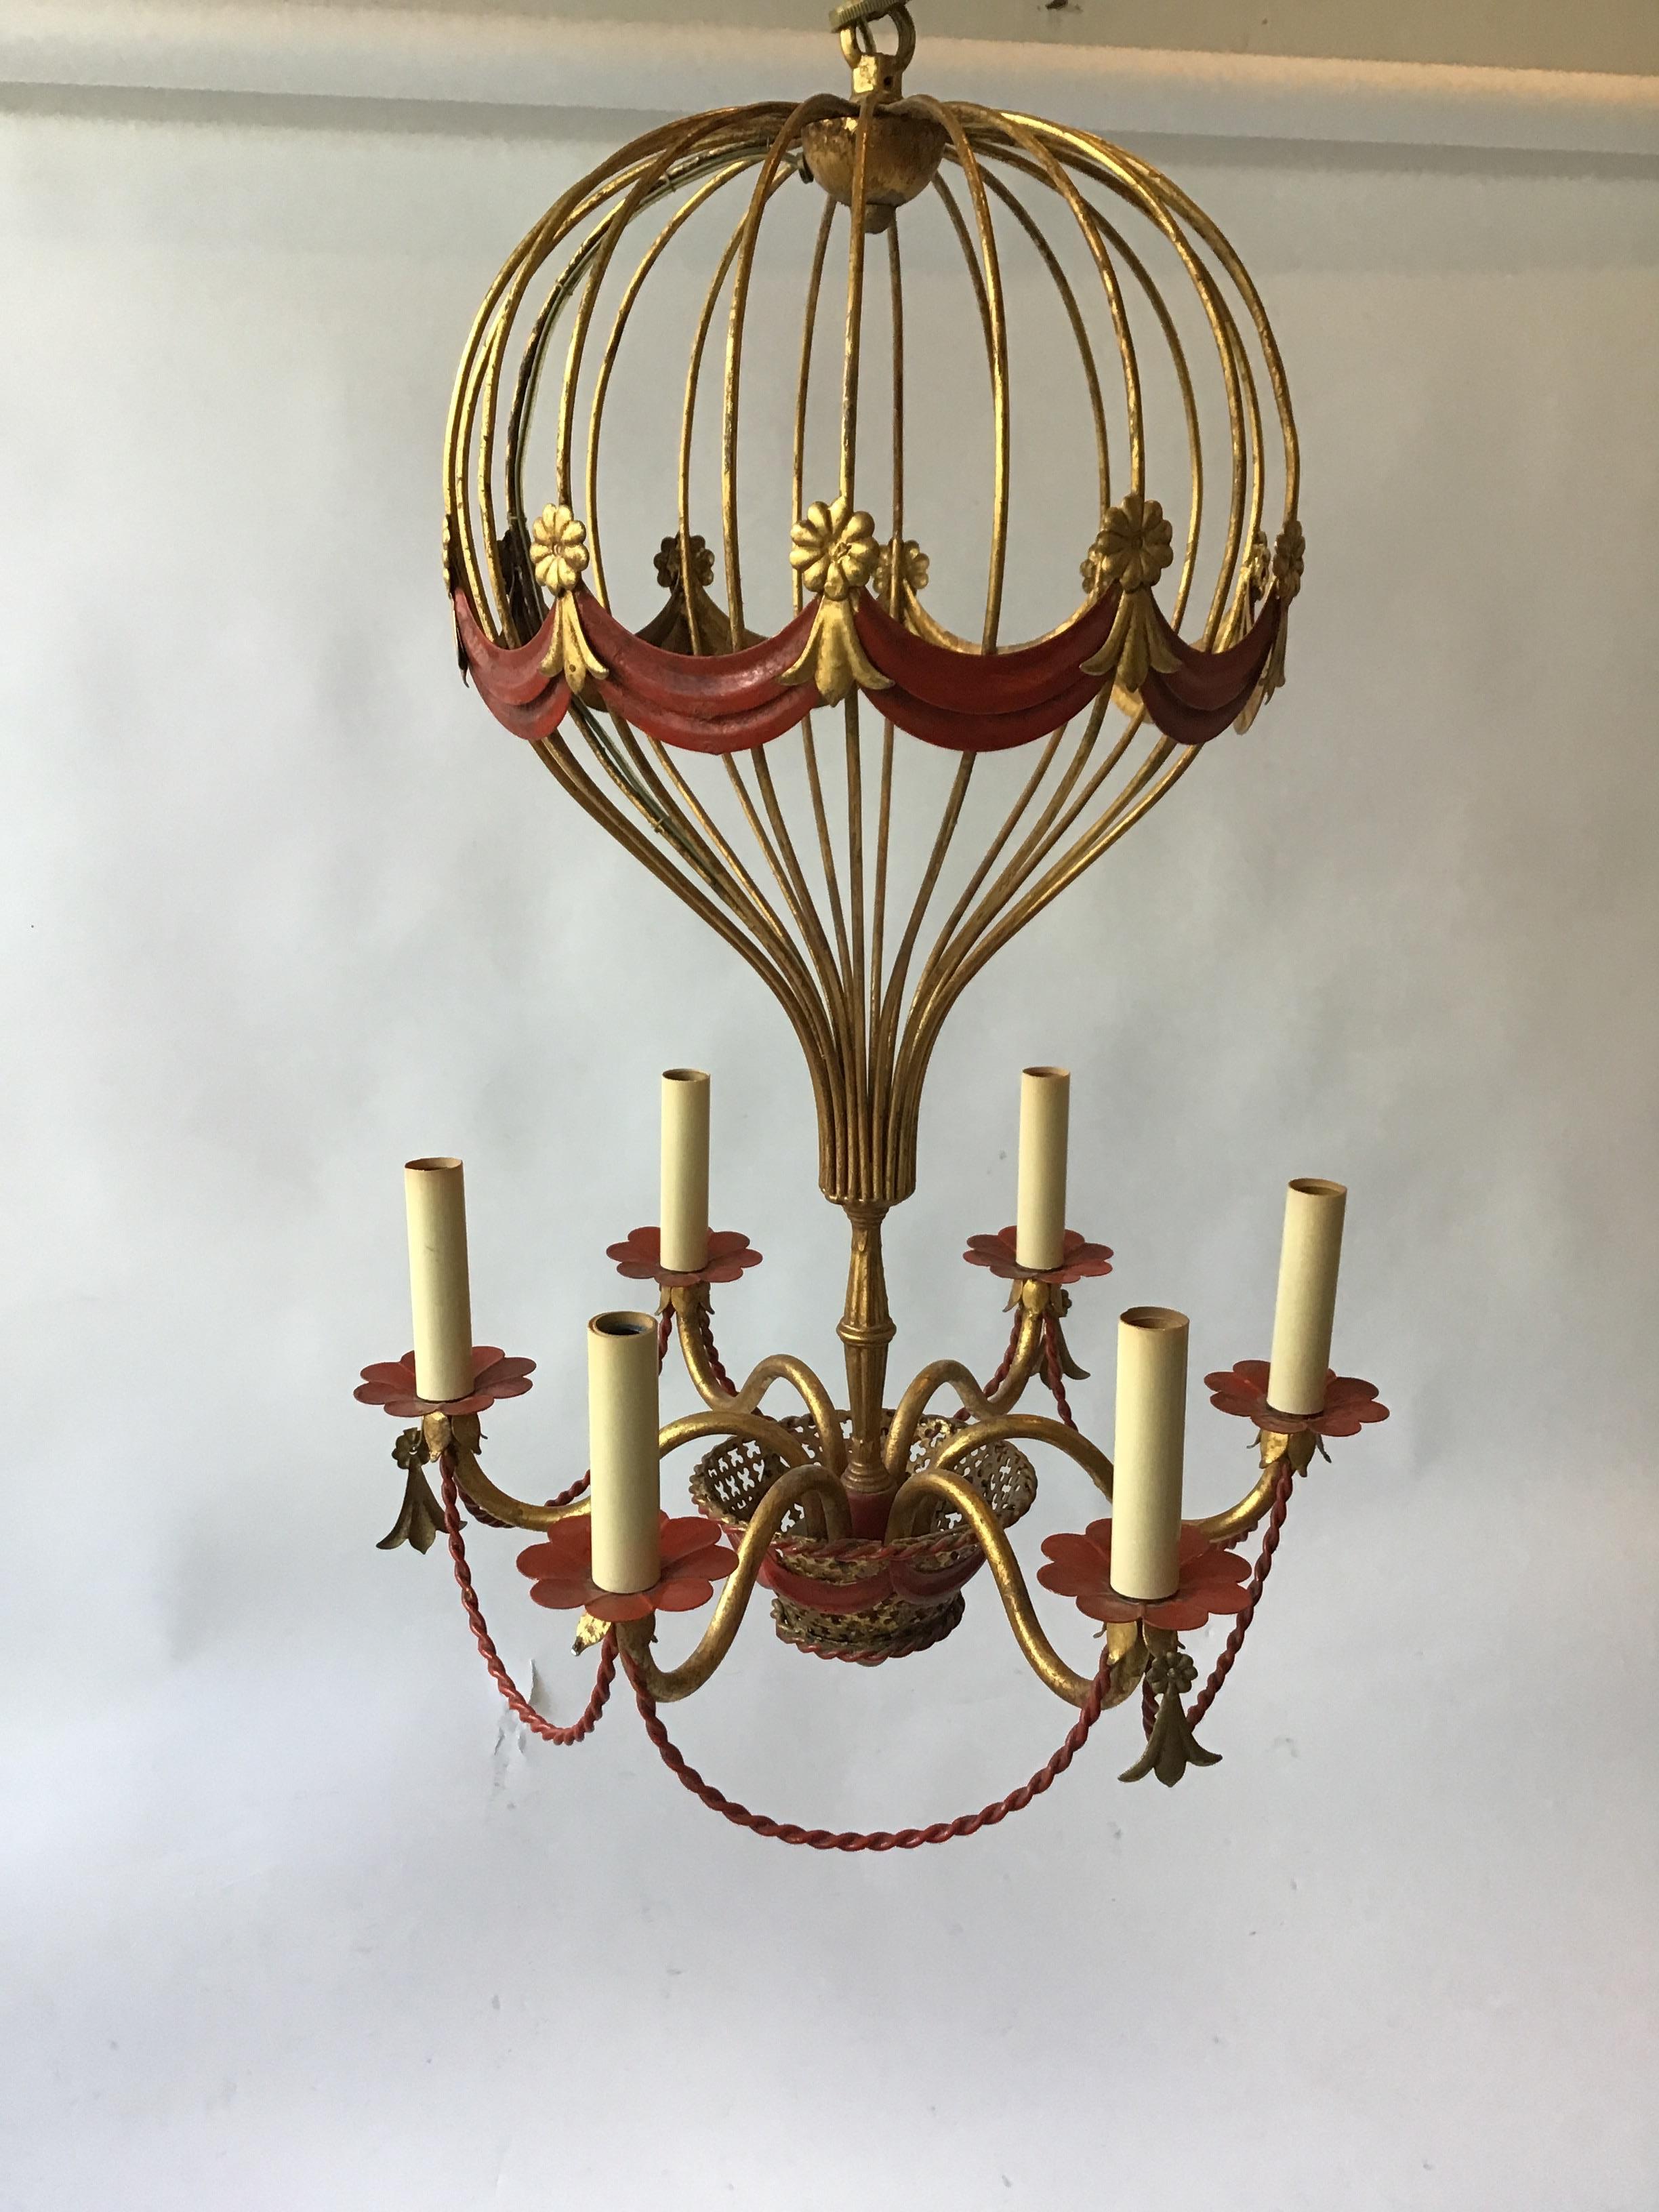 1970s Italian gilt iron hot air balloon chandelier. Decorative ornament hangs on every other arm.